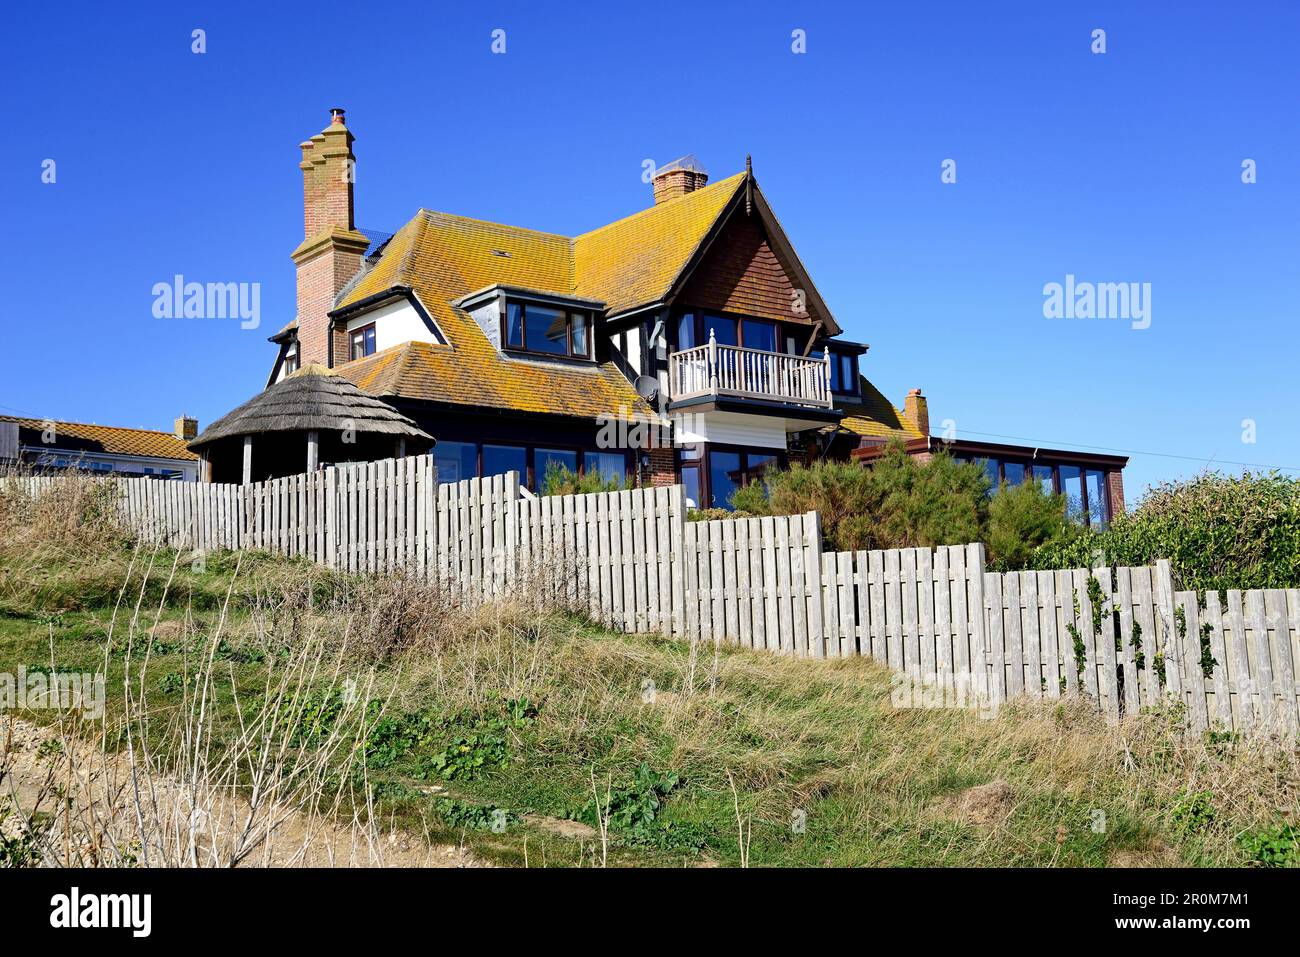 View of a large house on the hillside overlooking the beach, West Bay, Dorset, UK, Europe. Stock Photo